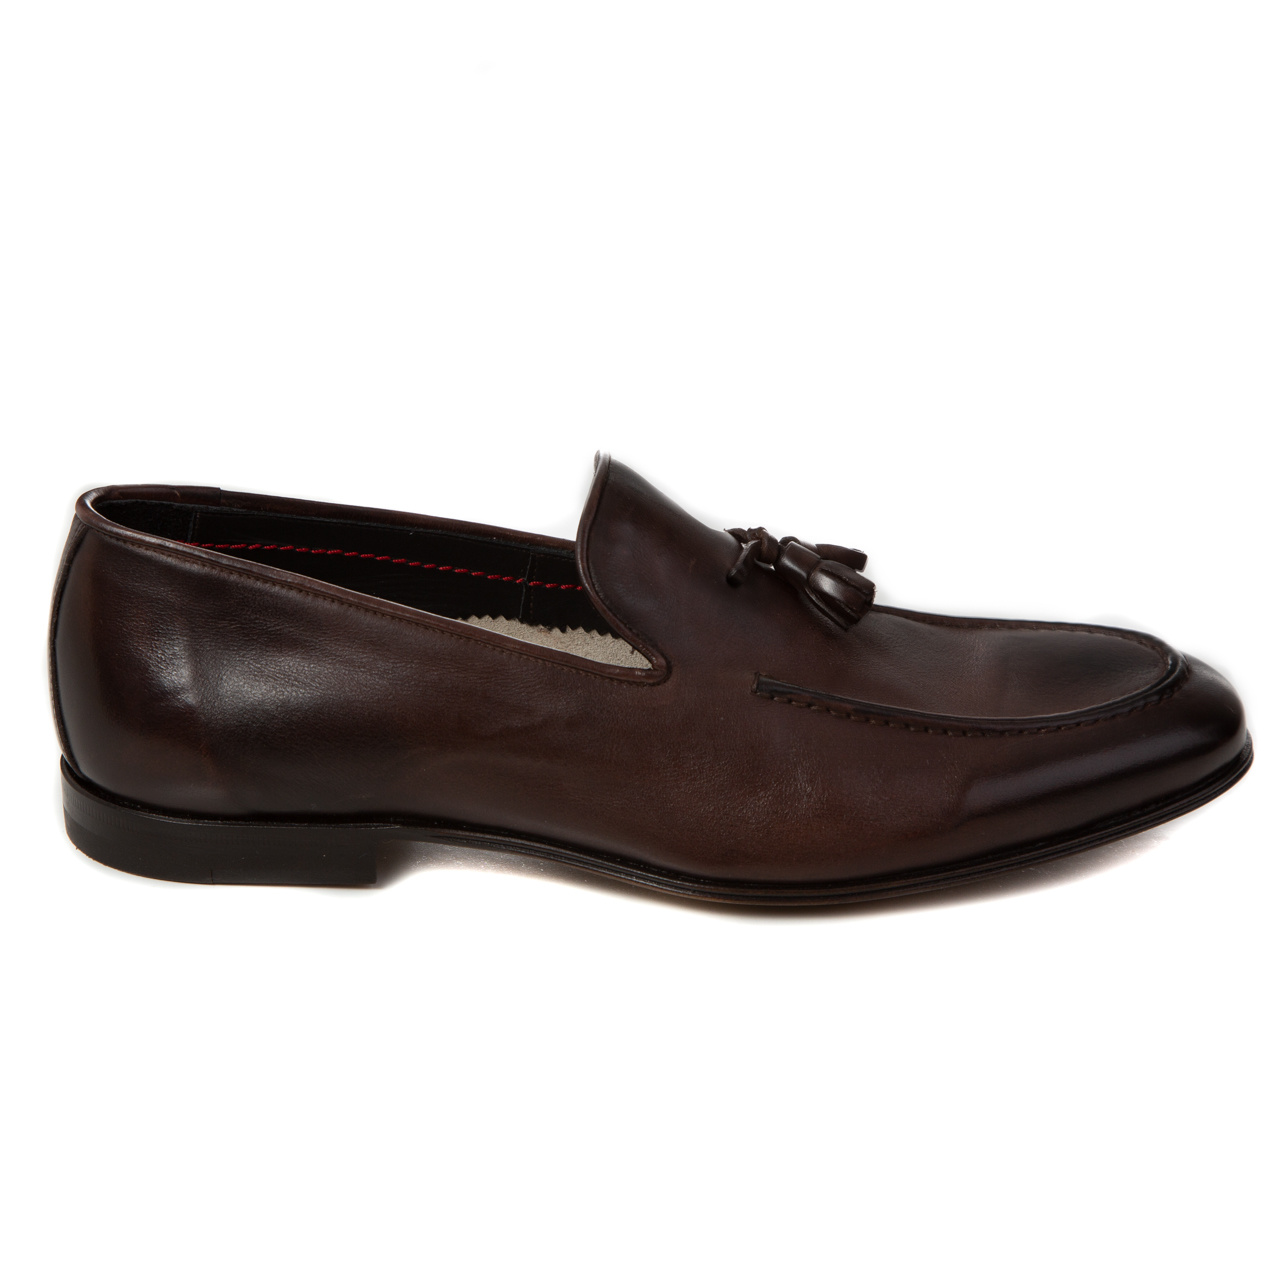 HANDMADE Moccasins calf leather - made in Italy - PM Eleganza Milanese